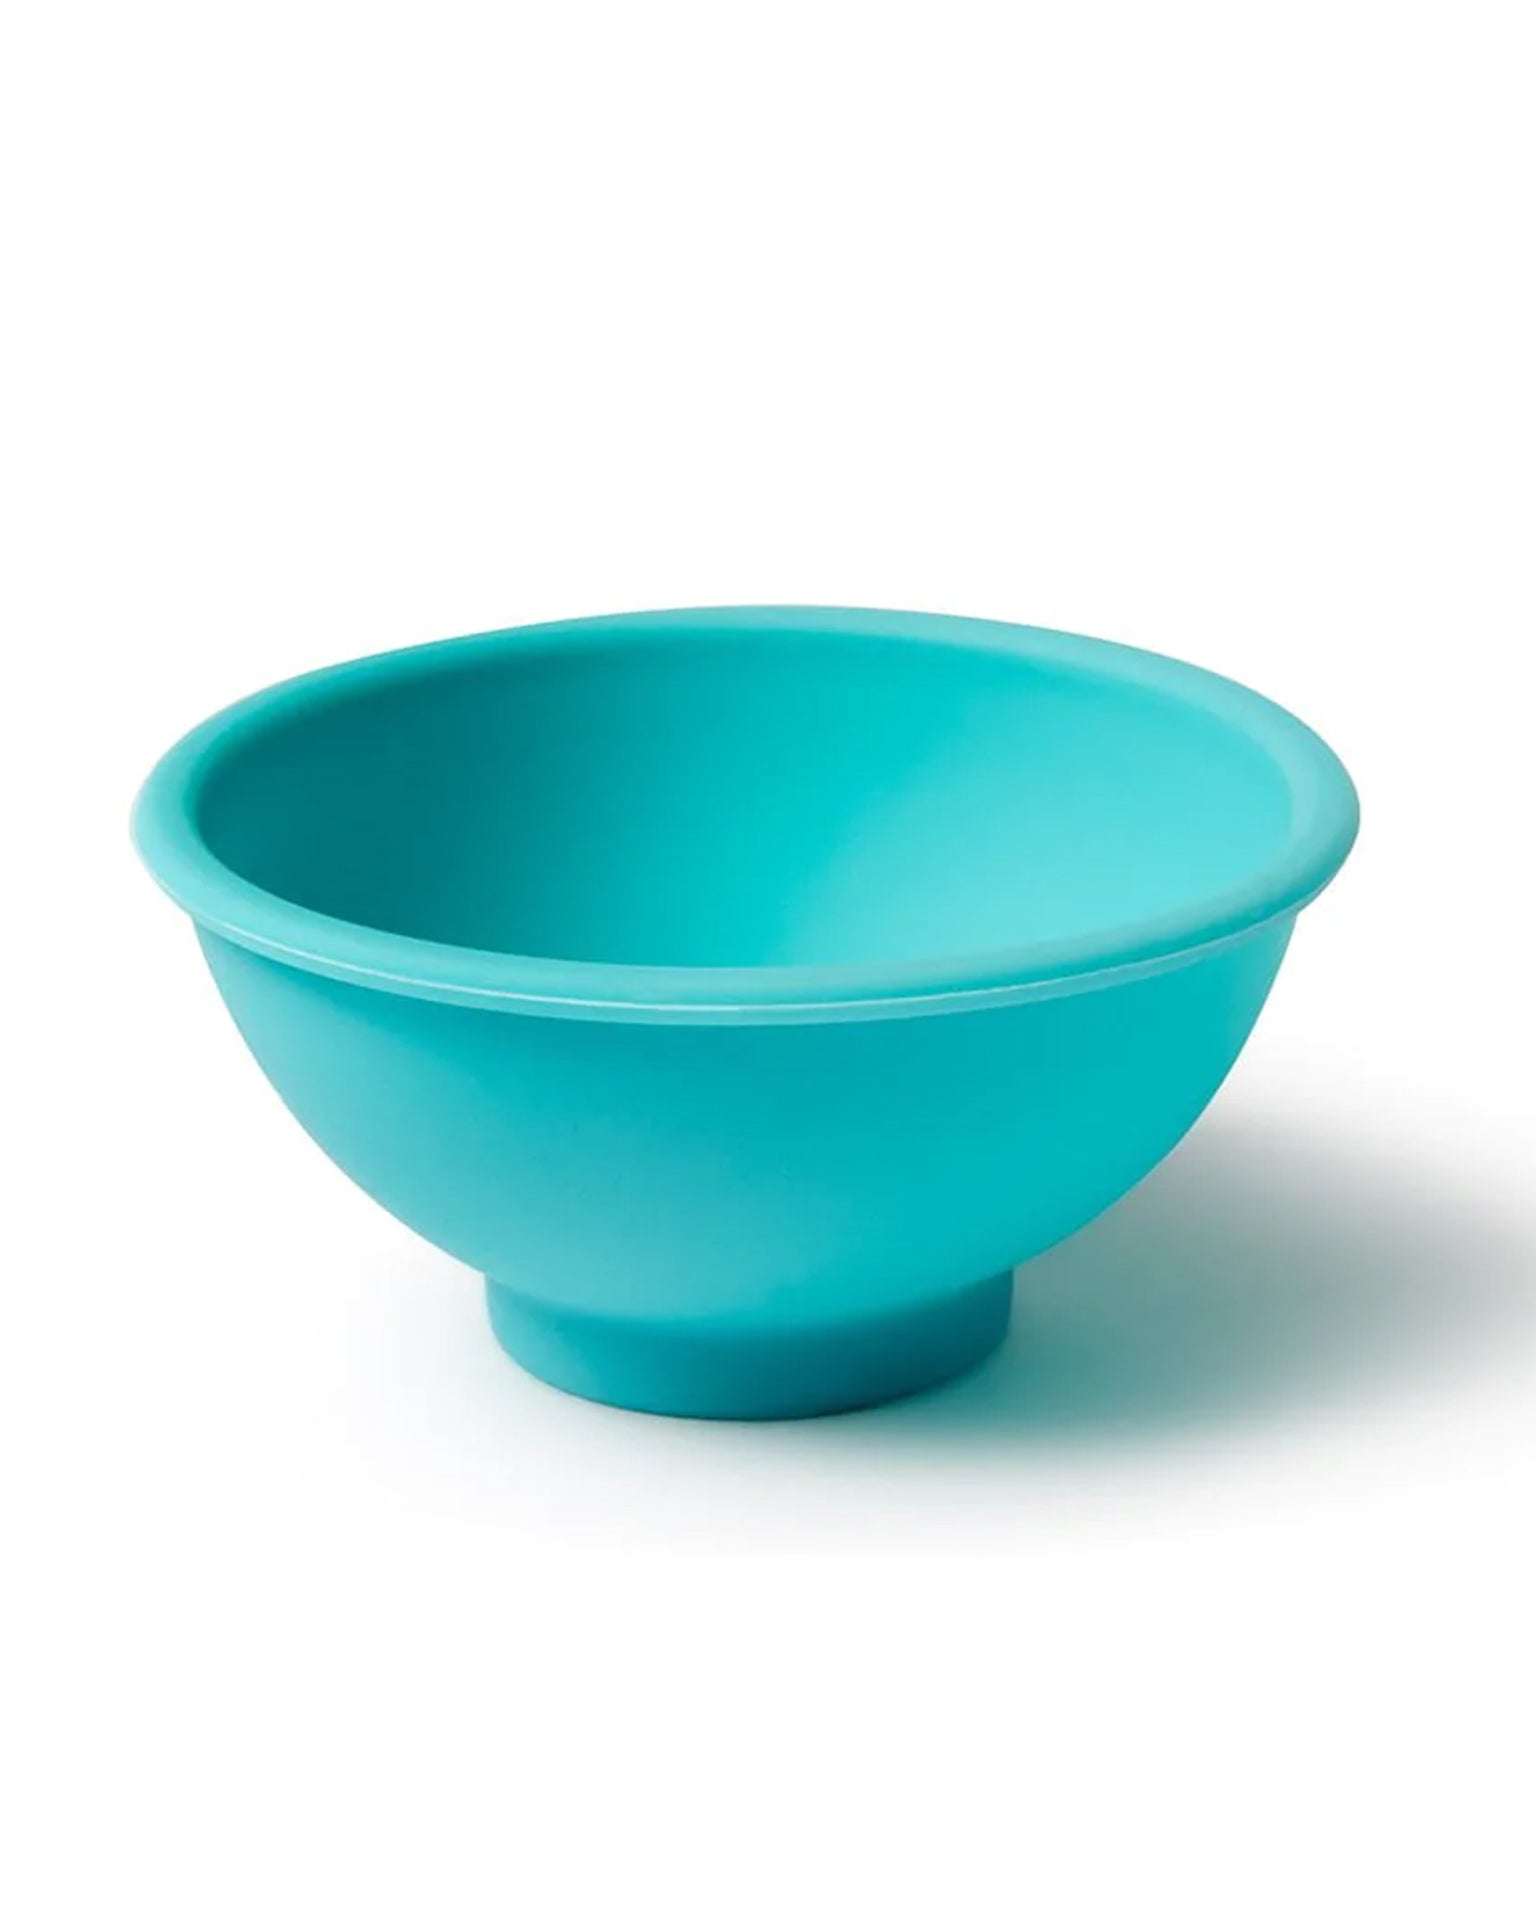 Little dabble & dollop room dabble & dollop mixing bowl